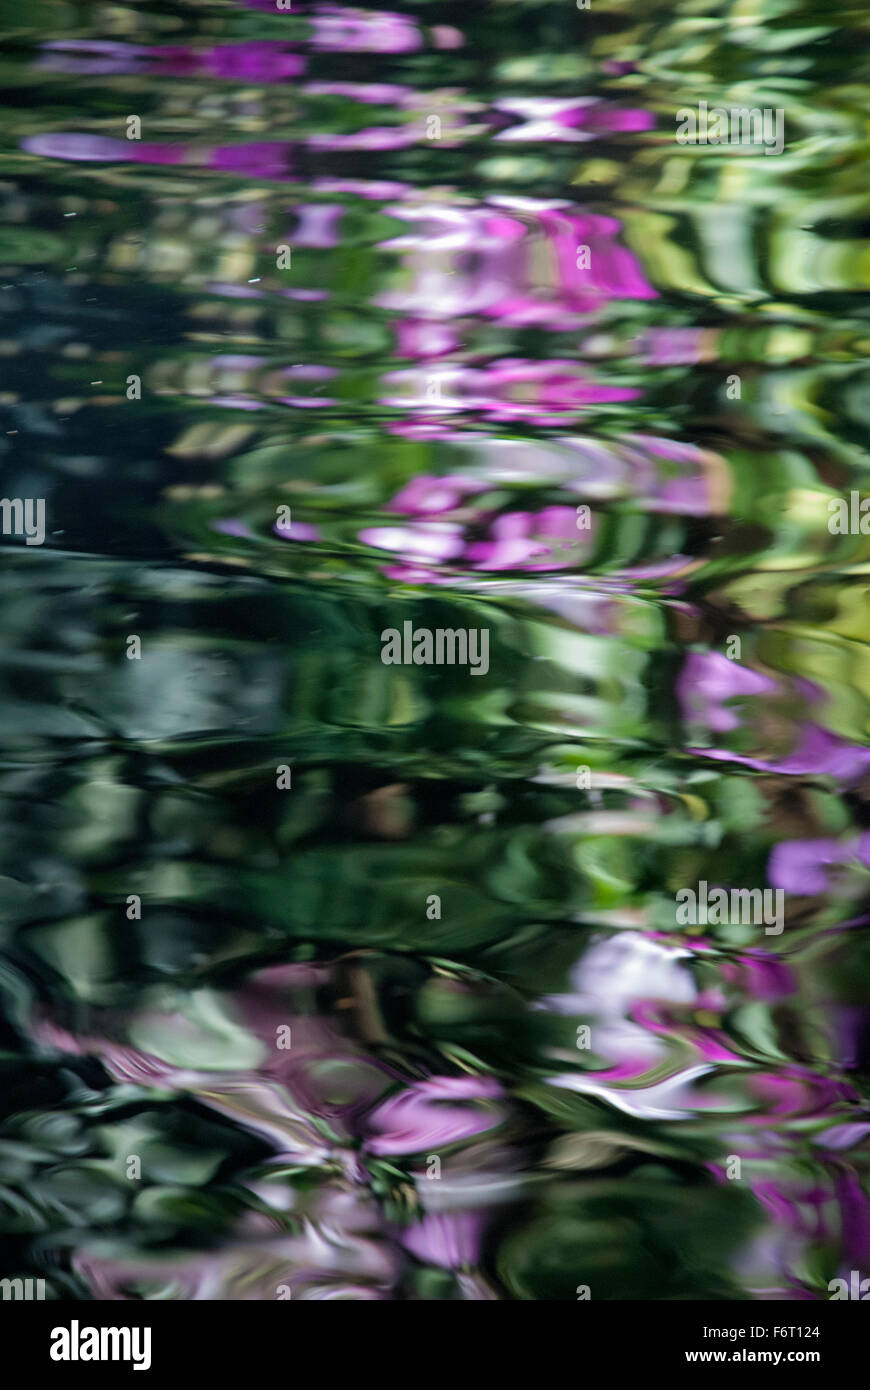 Abstract reflection of pink flowers and greenery in water. Stock Photo